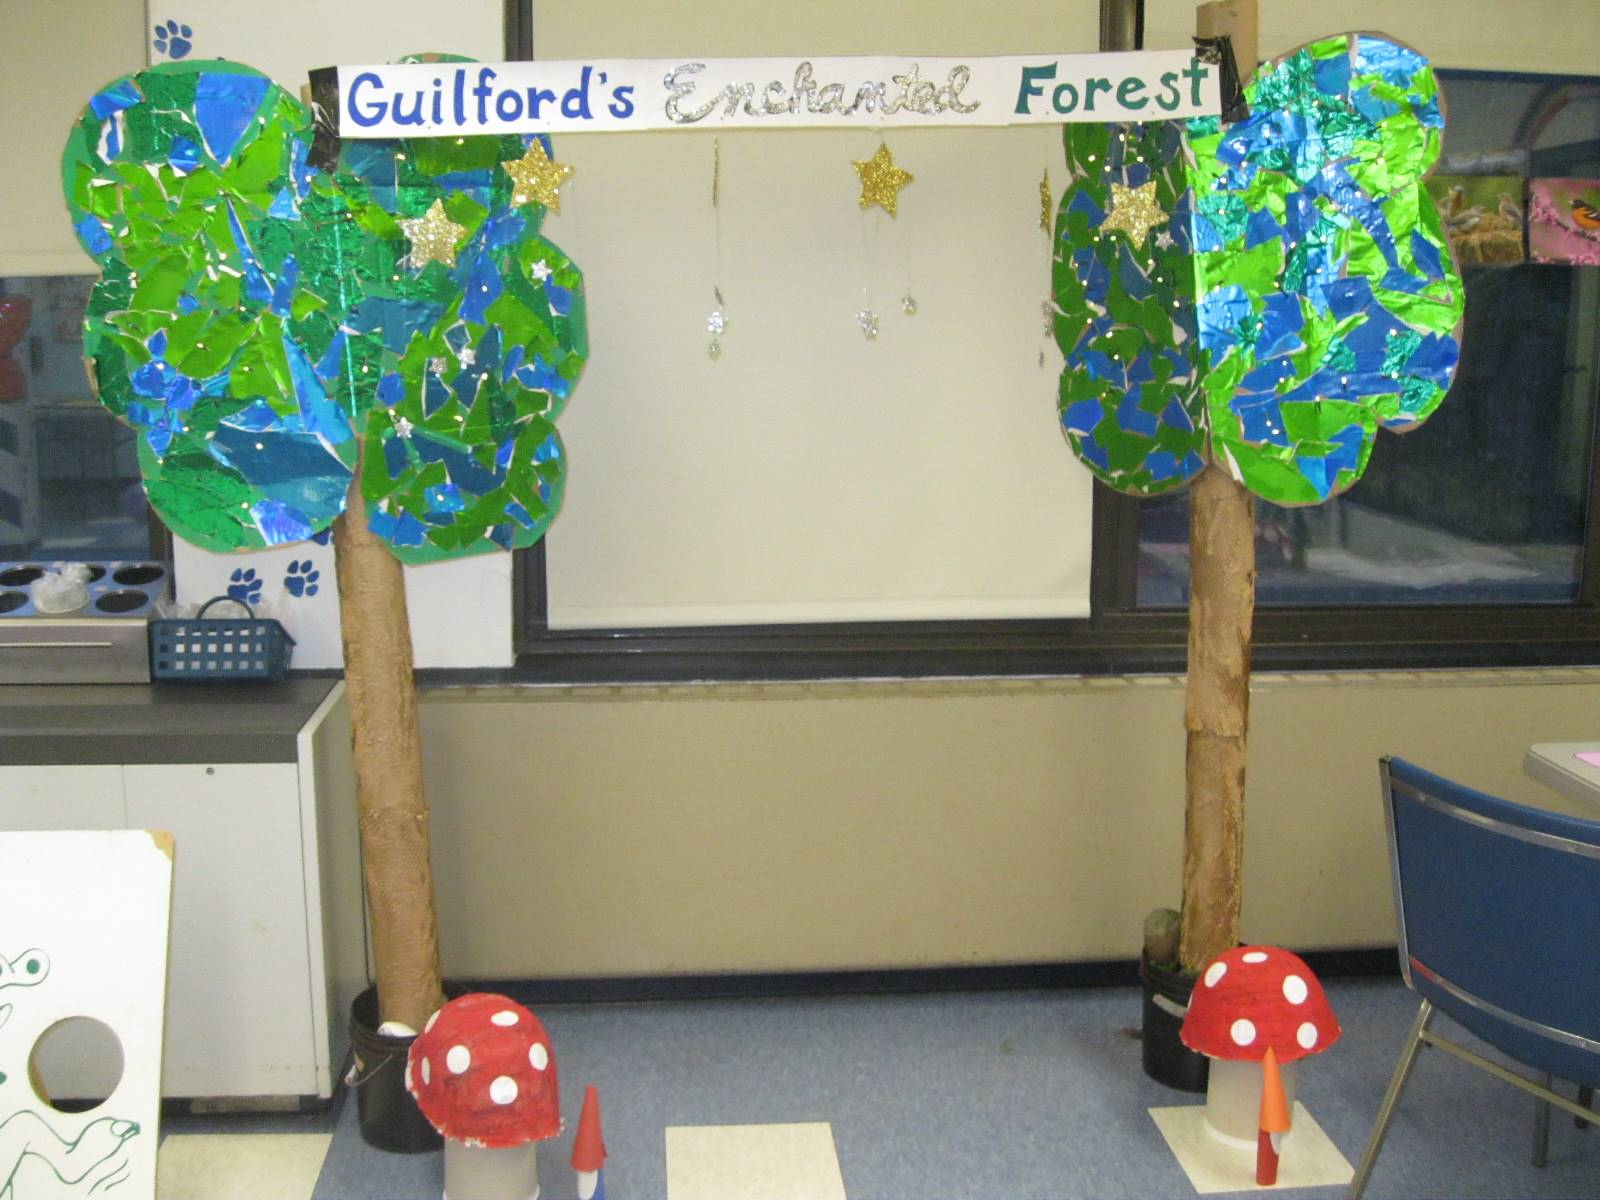 Guilford's Enchanted Forest Book Fair Sign.